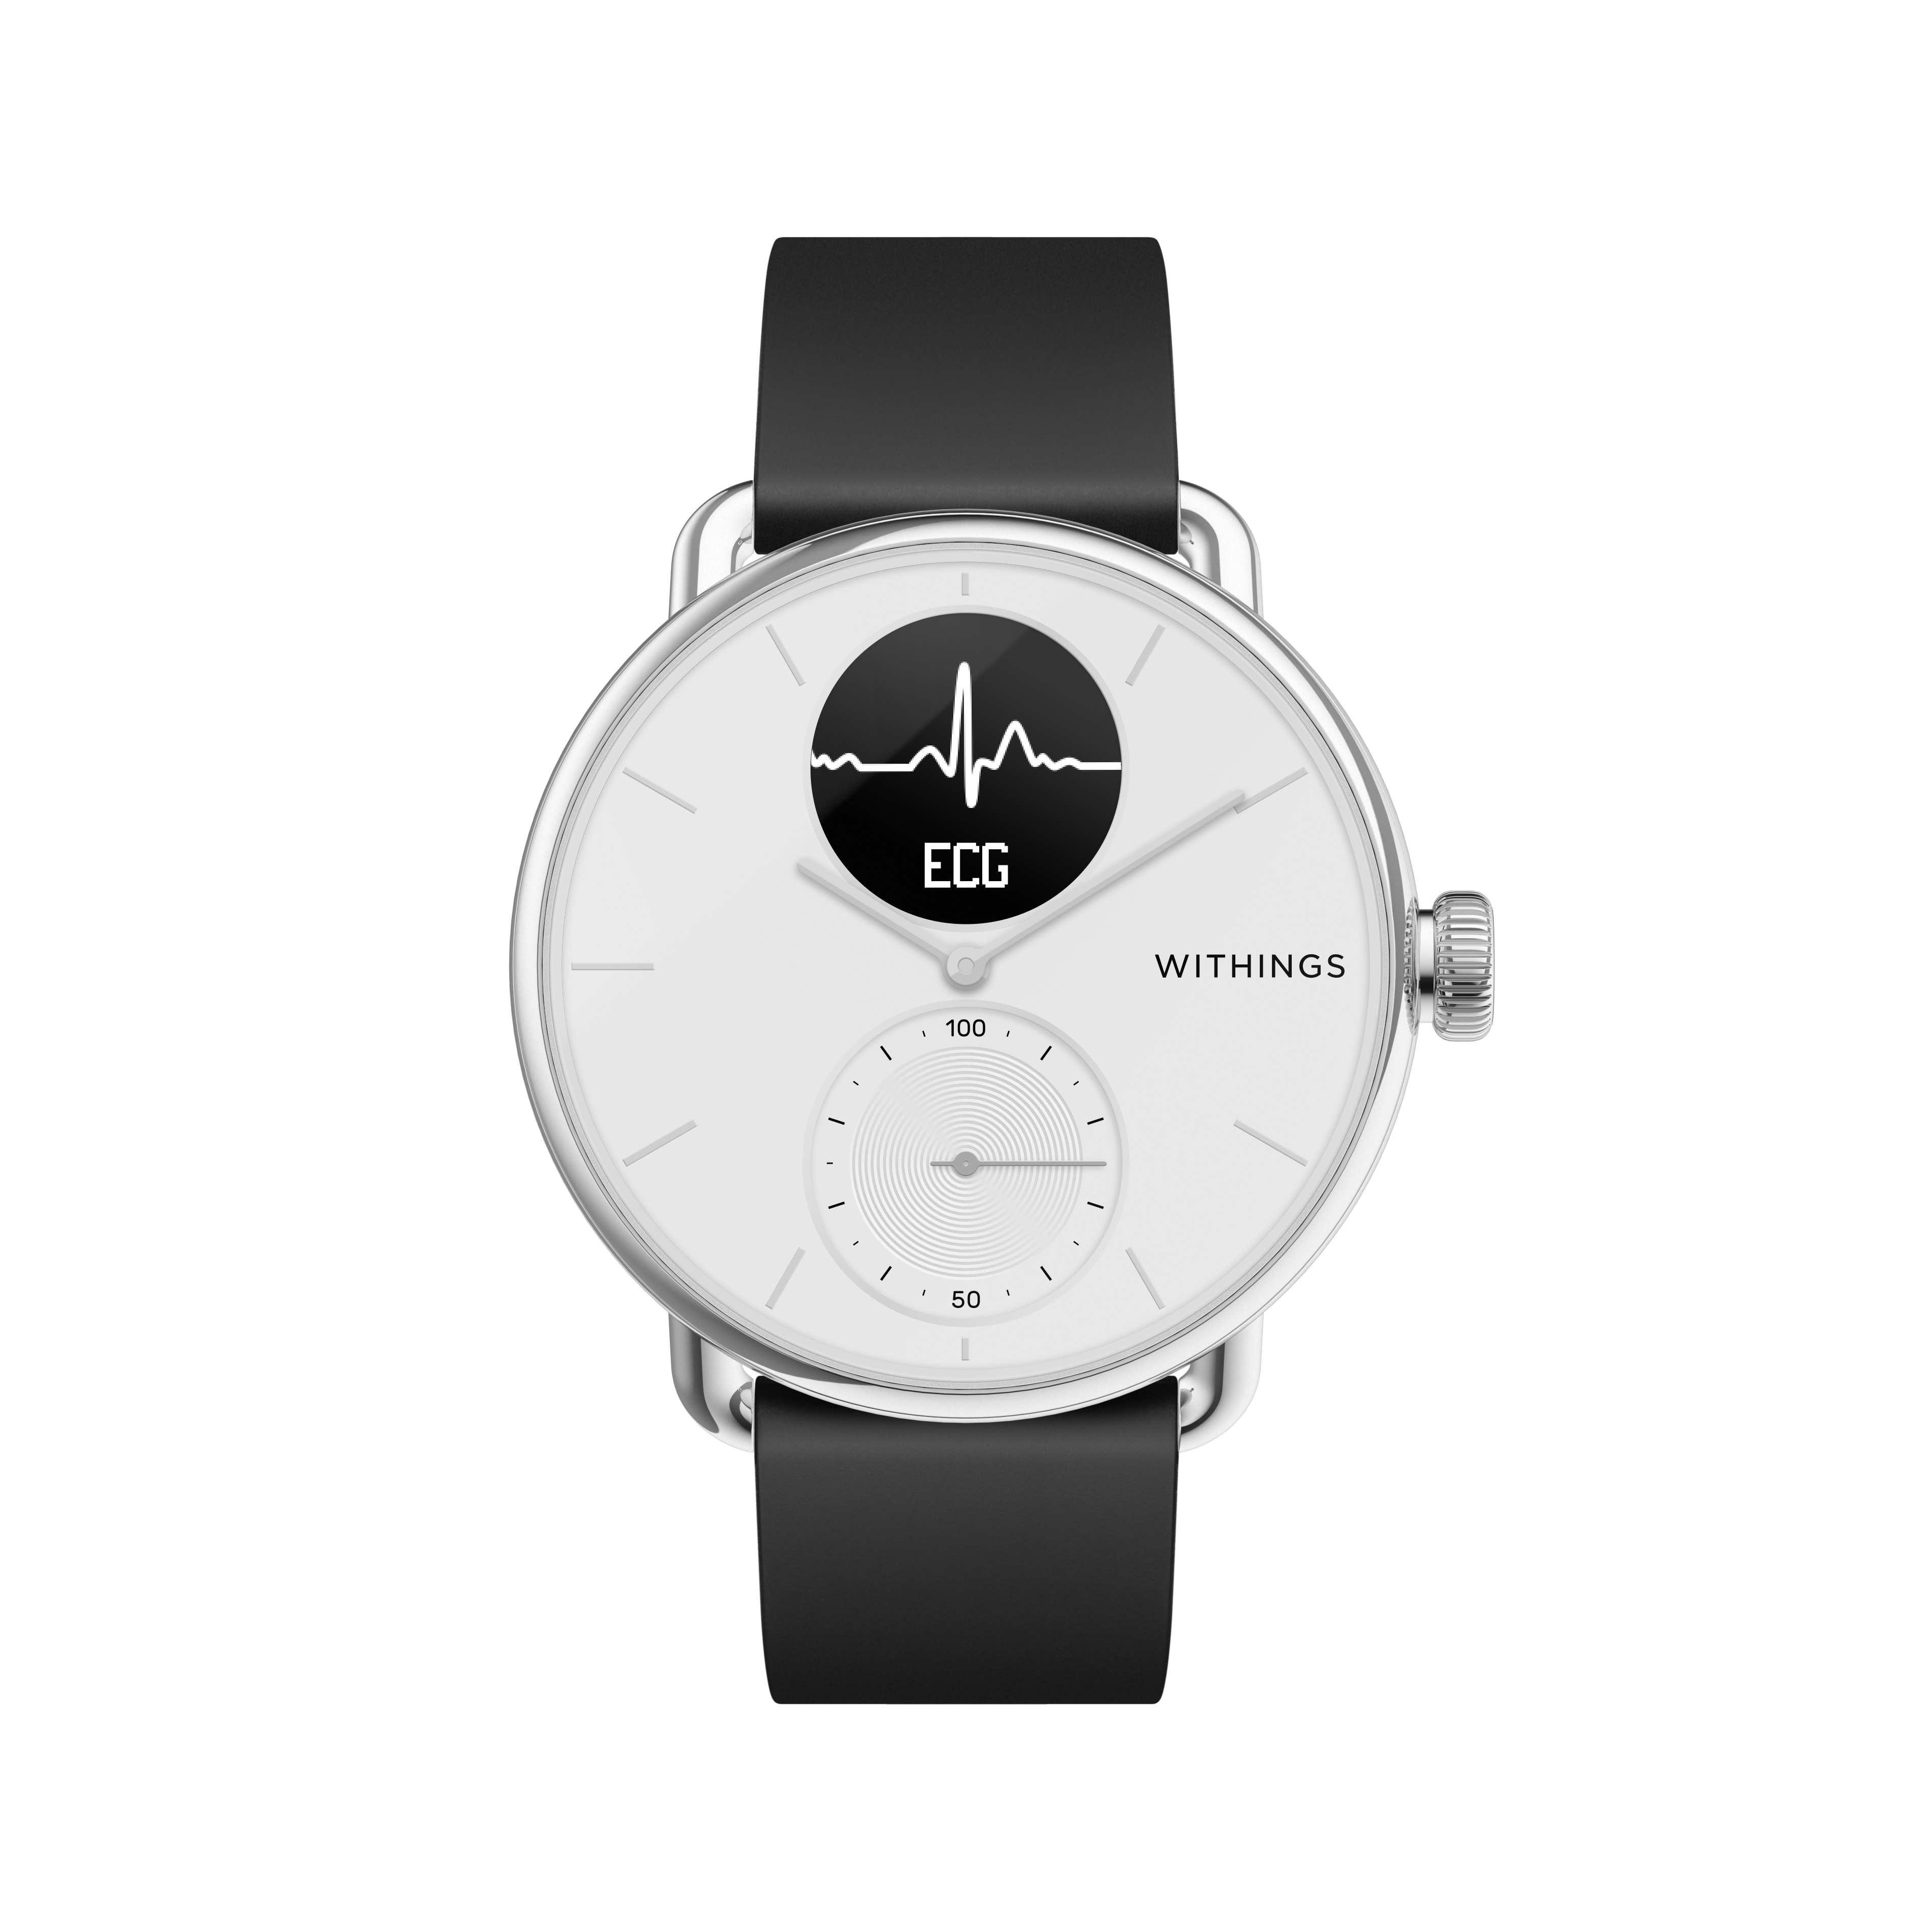 A picture of one of Withings' activity tracking watches.